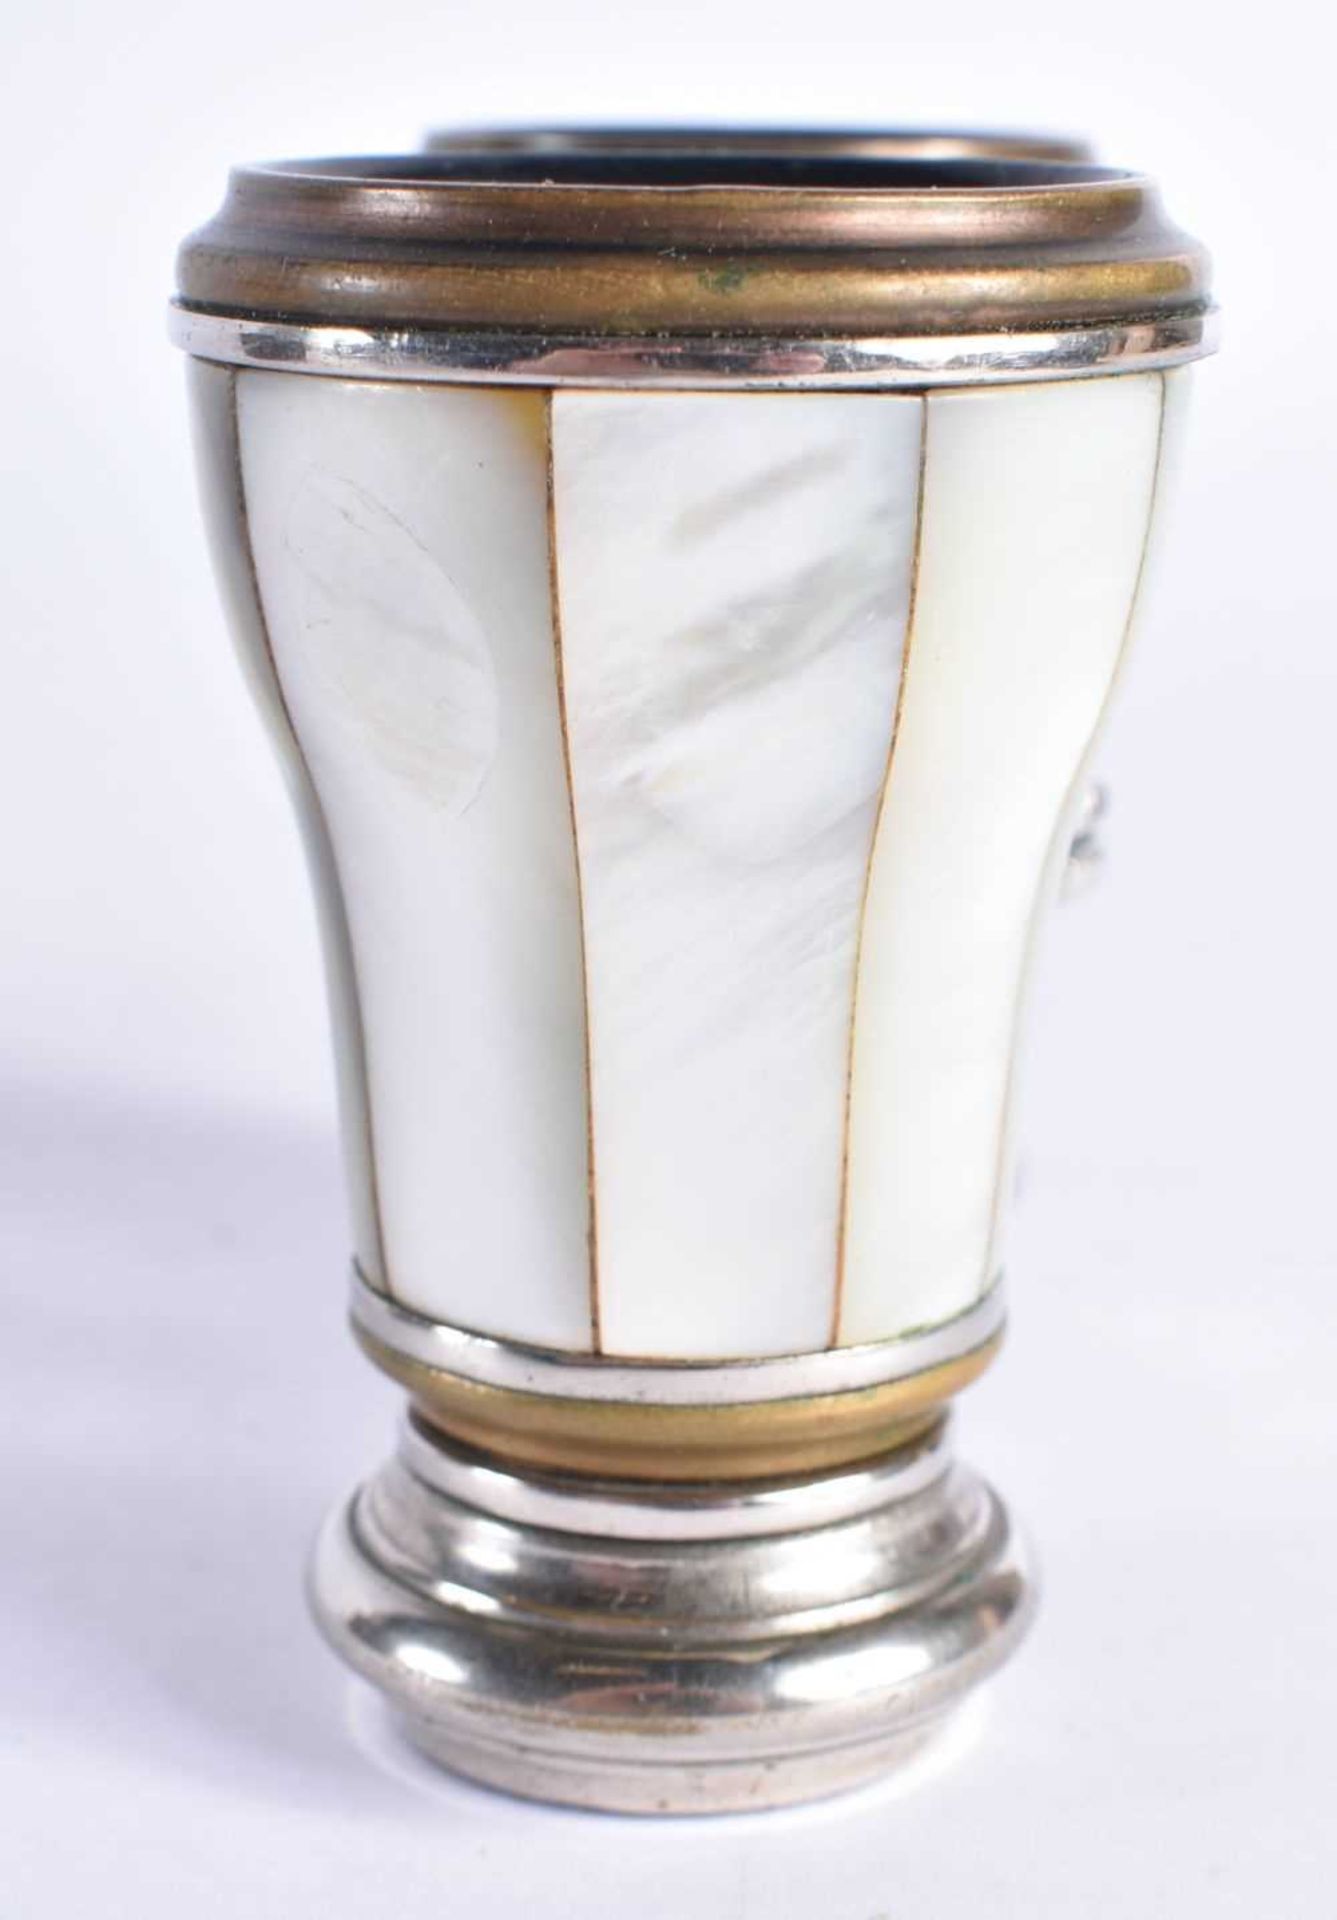 A CASED PAIR OF MOTHER OF PEARL OPERA GLASSES 9 x 10cm extended - Image 4 of 6